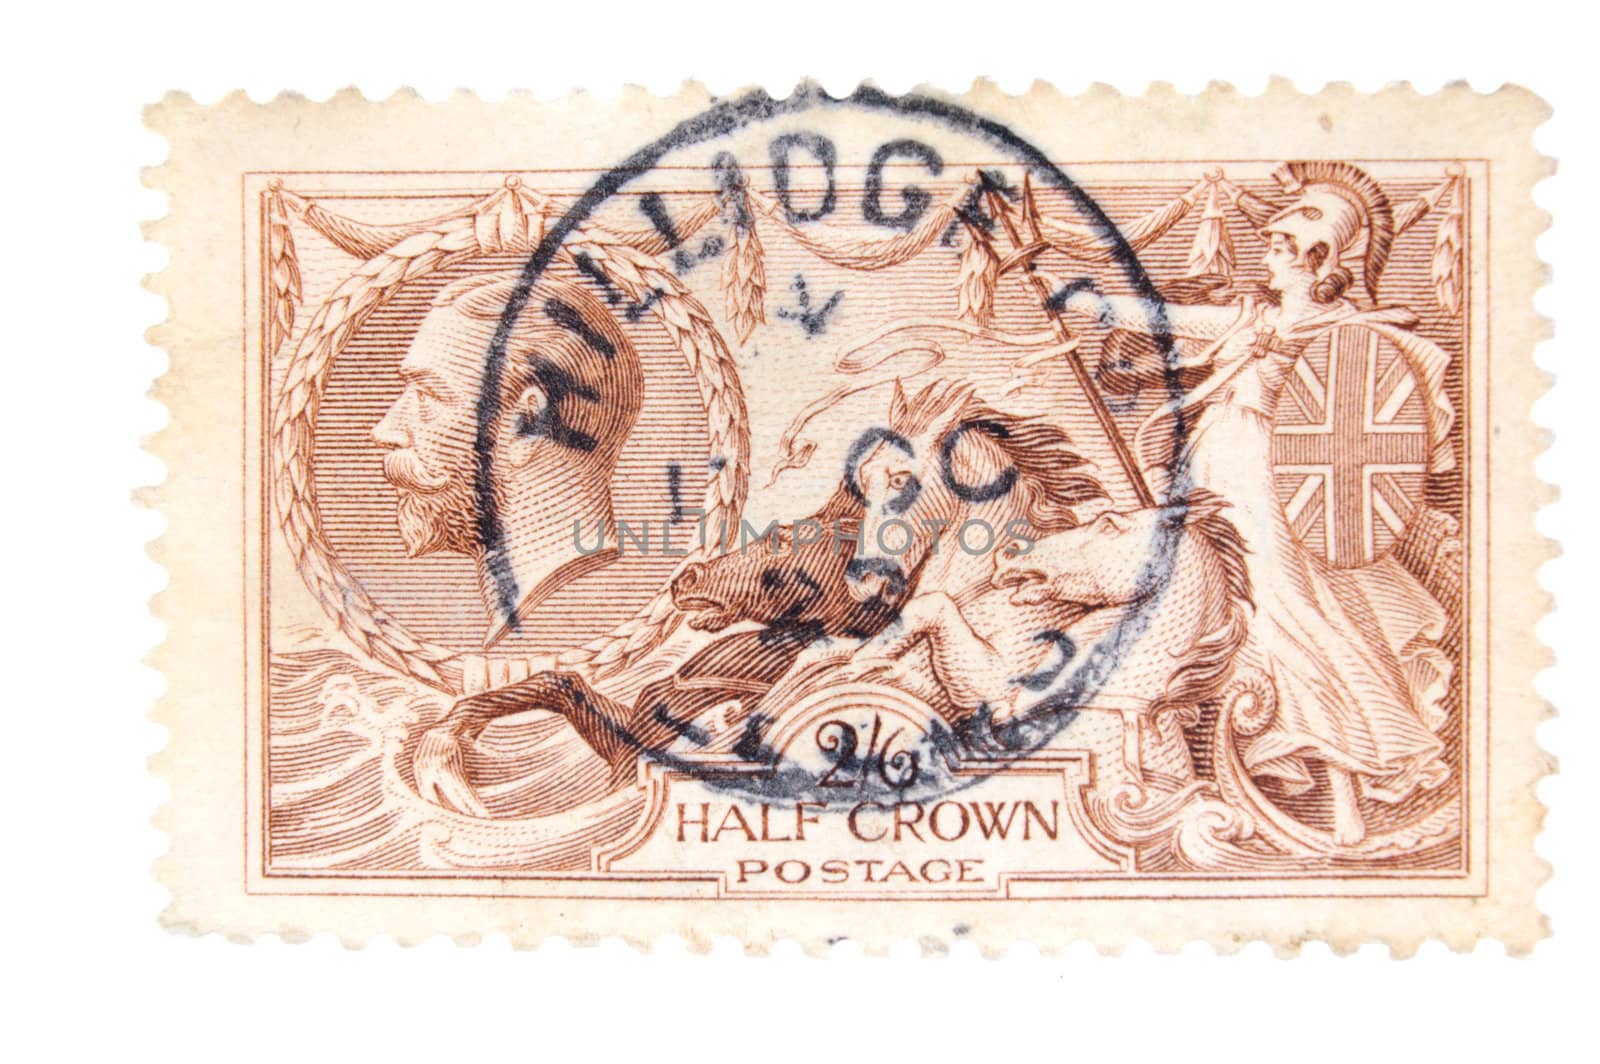 Canada - Circa 1930 : A vintage English postage stamp image of Britannia on chariot with horses and inset of King George value Half Crown, series circa 1929